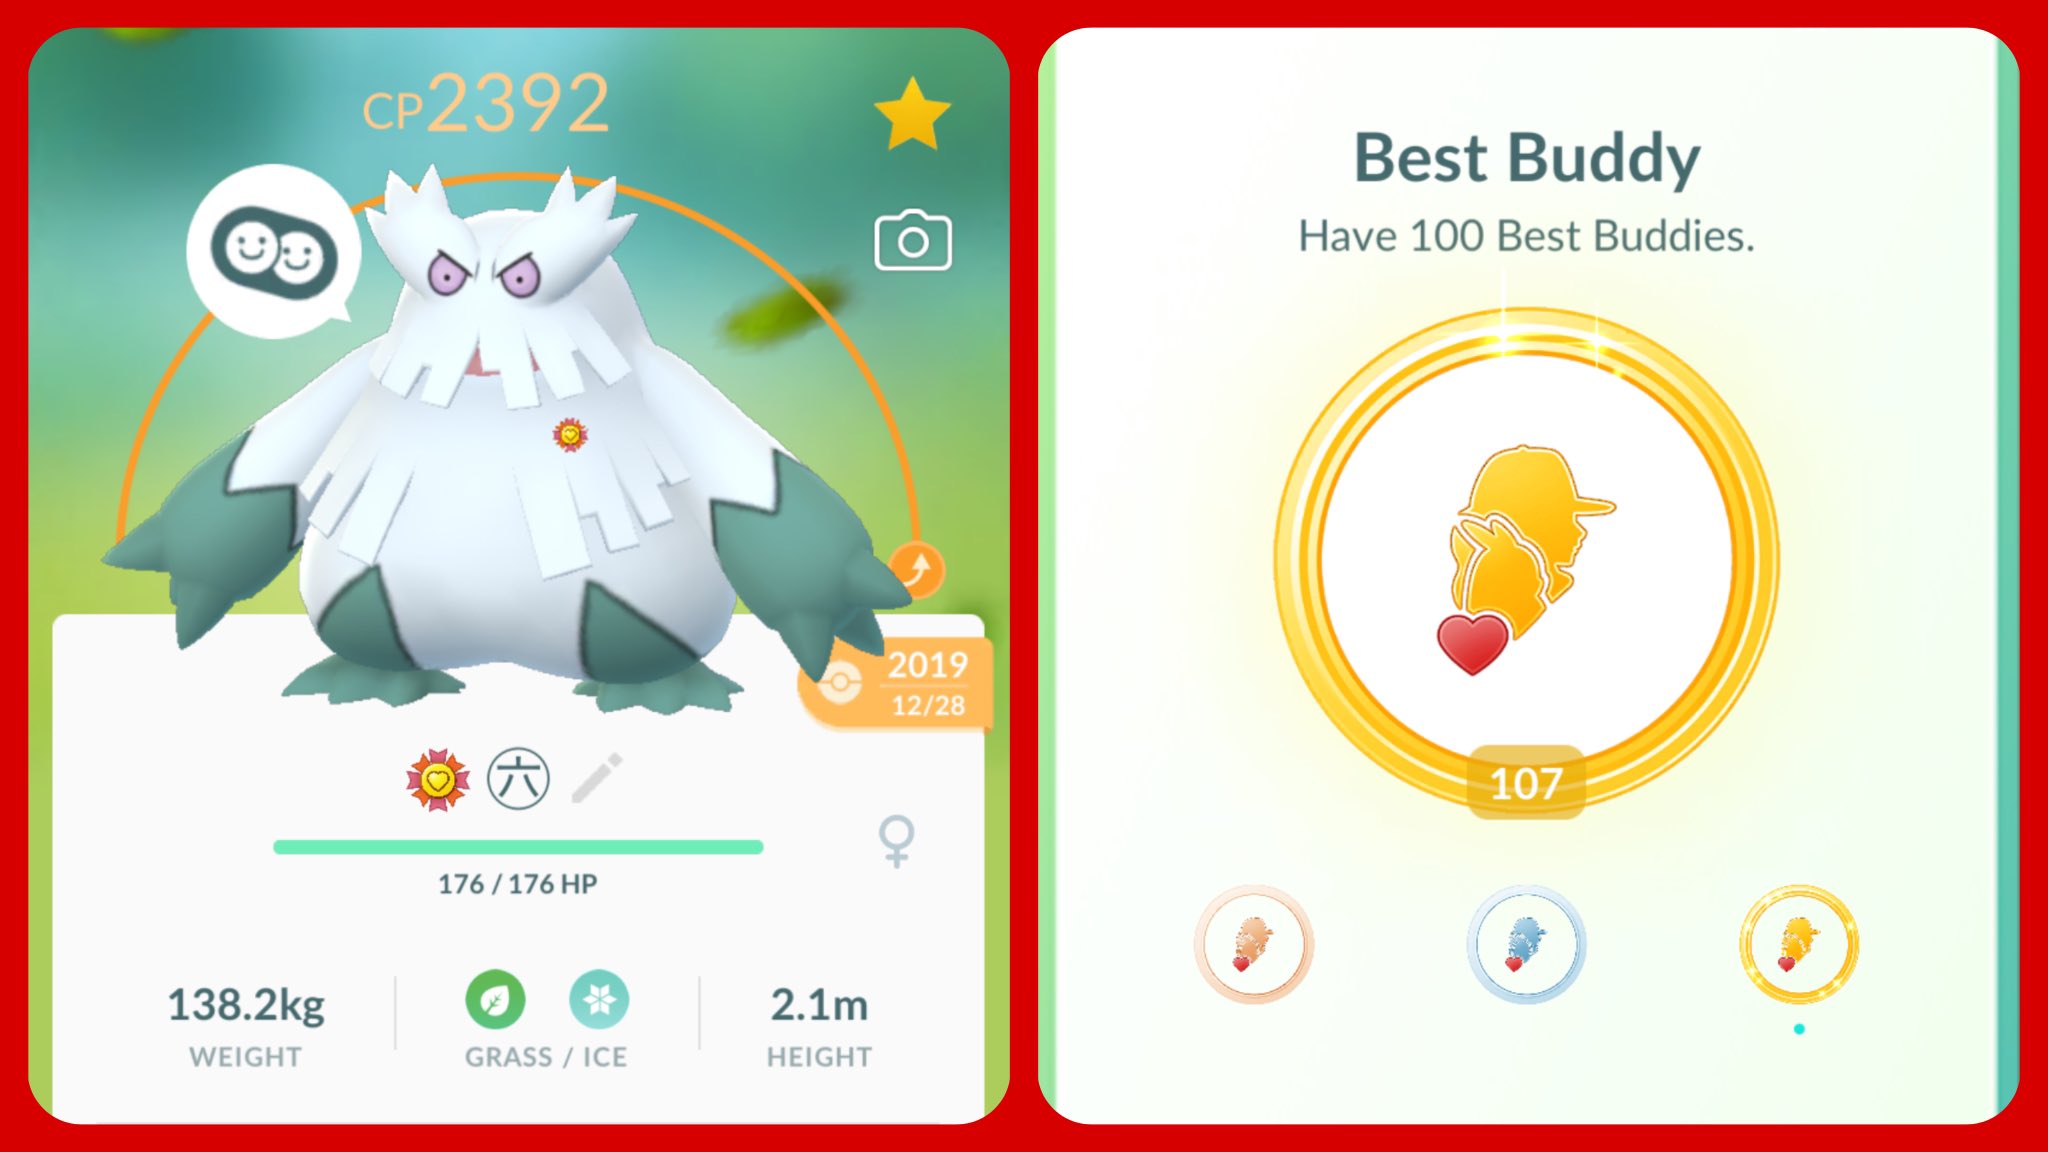 What are the full requirements to get a best buddy in Pokemon Go